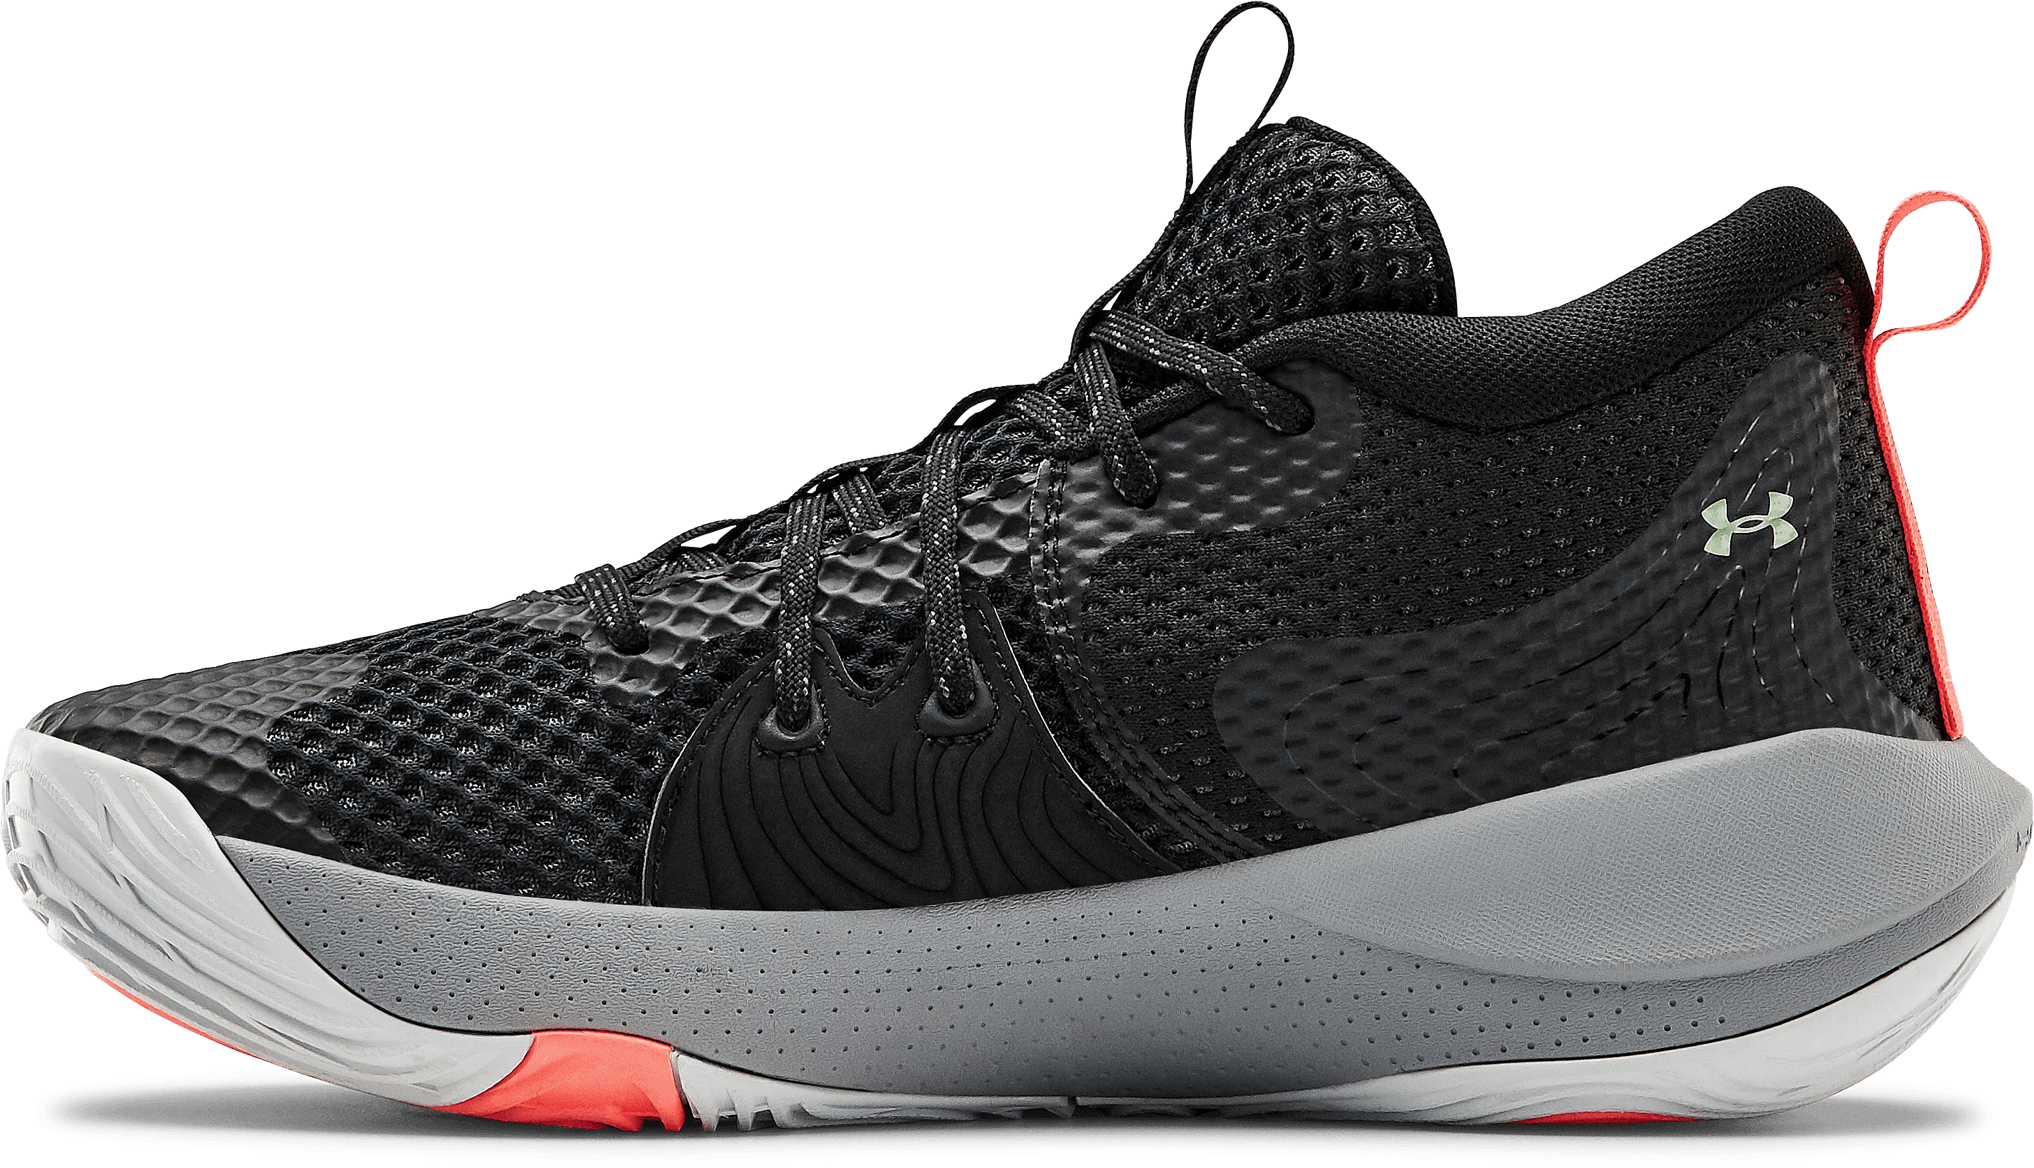 Under Armour Embiid 1 - Review, Deals, Pics of 9 Colorways